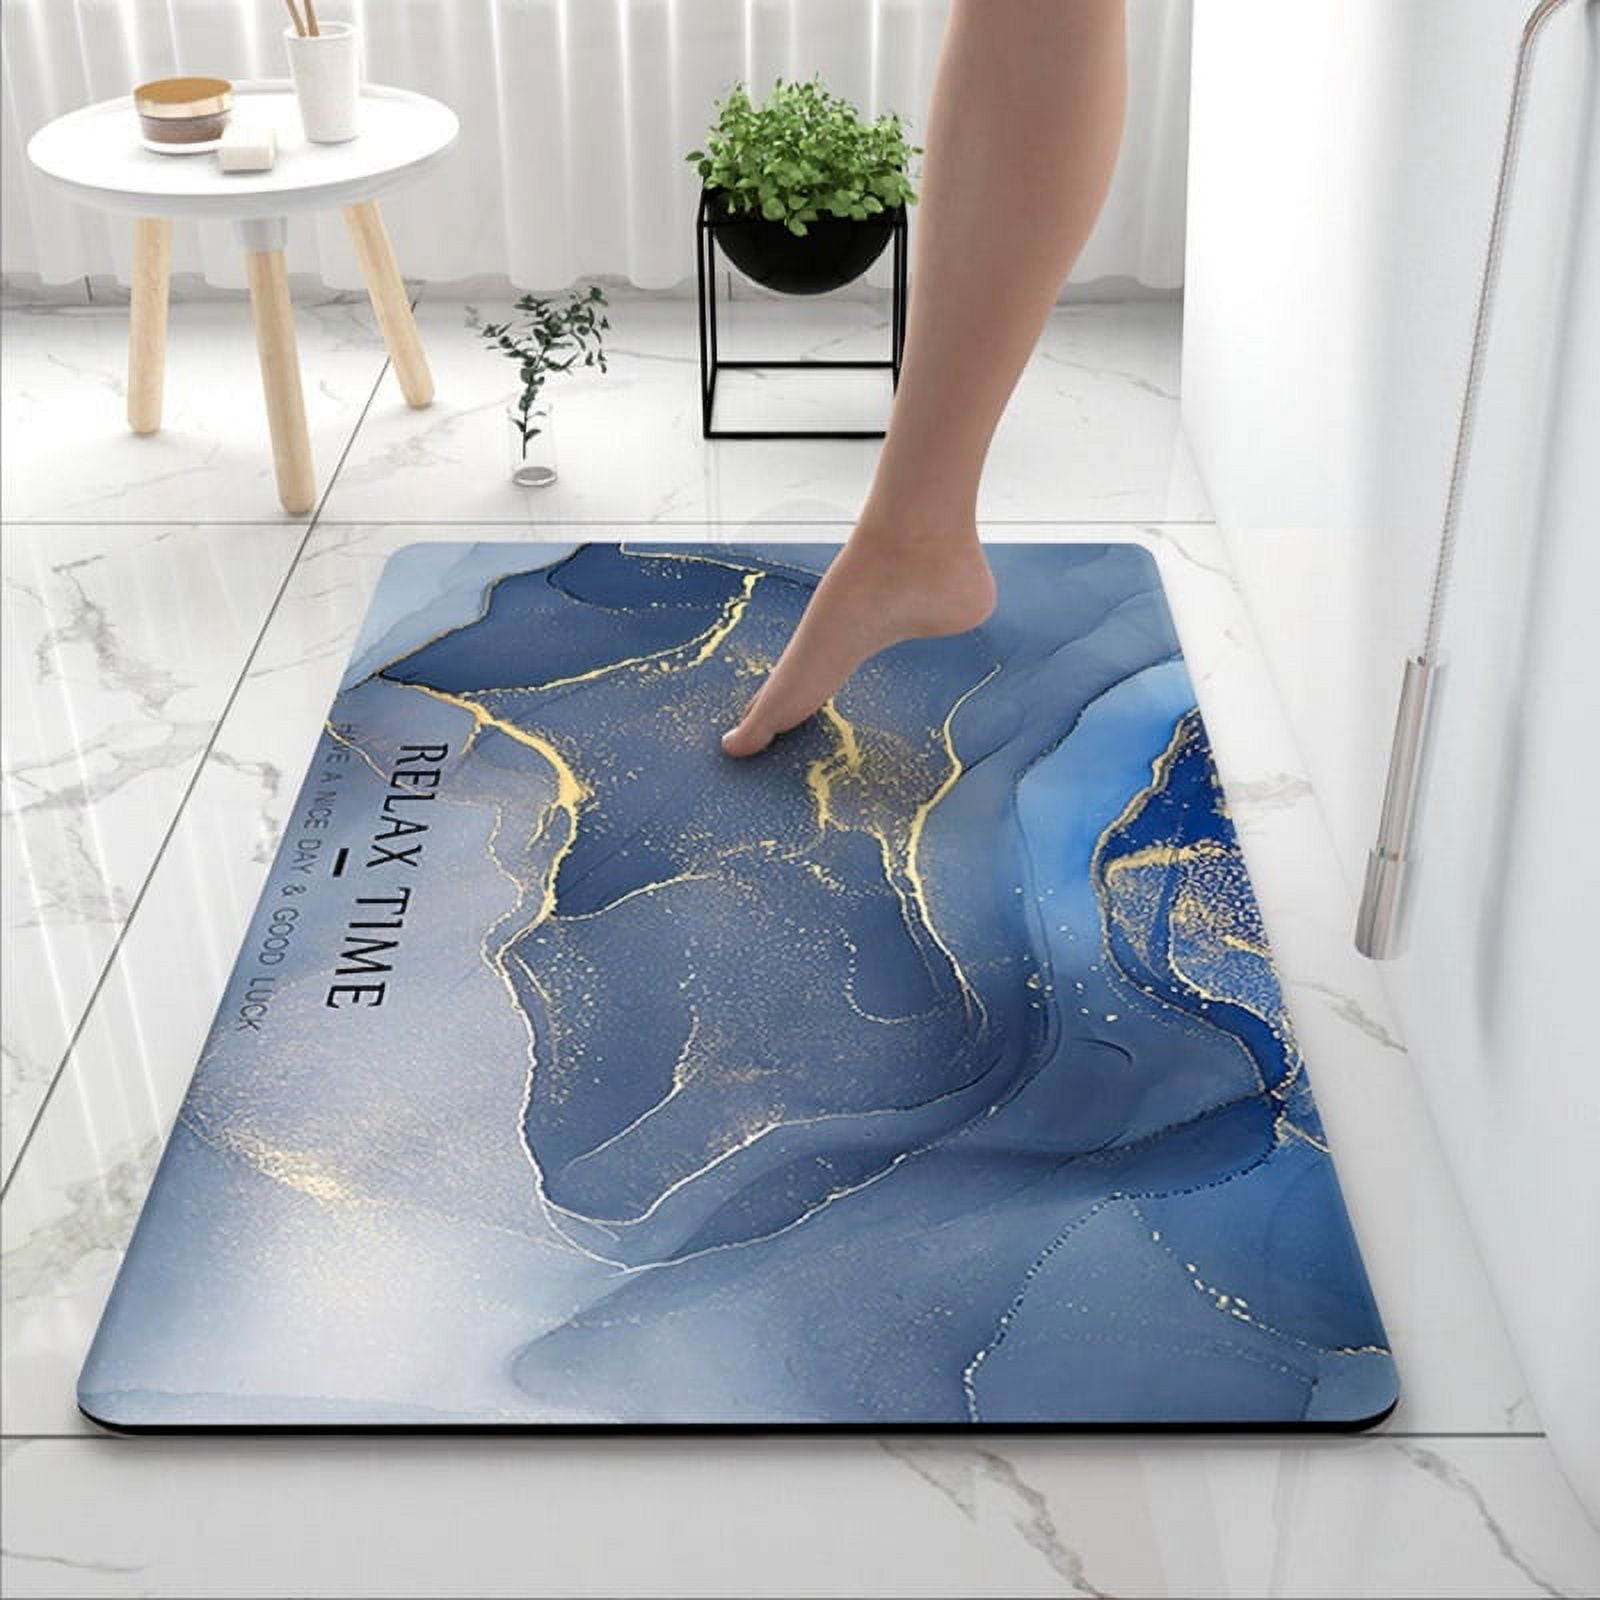  Stiio Large Bath Mat Rug17x43 inches, Super Absorbent Quick Dry Bathroom  Rugs Non-Slip, Thin Kitchen Mats That Fit Under Door, Long Washable Floor  Mats for Livingroom, Shower Mat for Tub, Sink